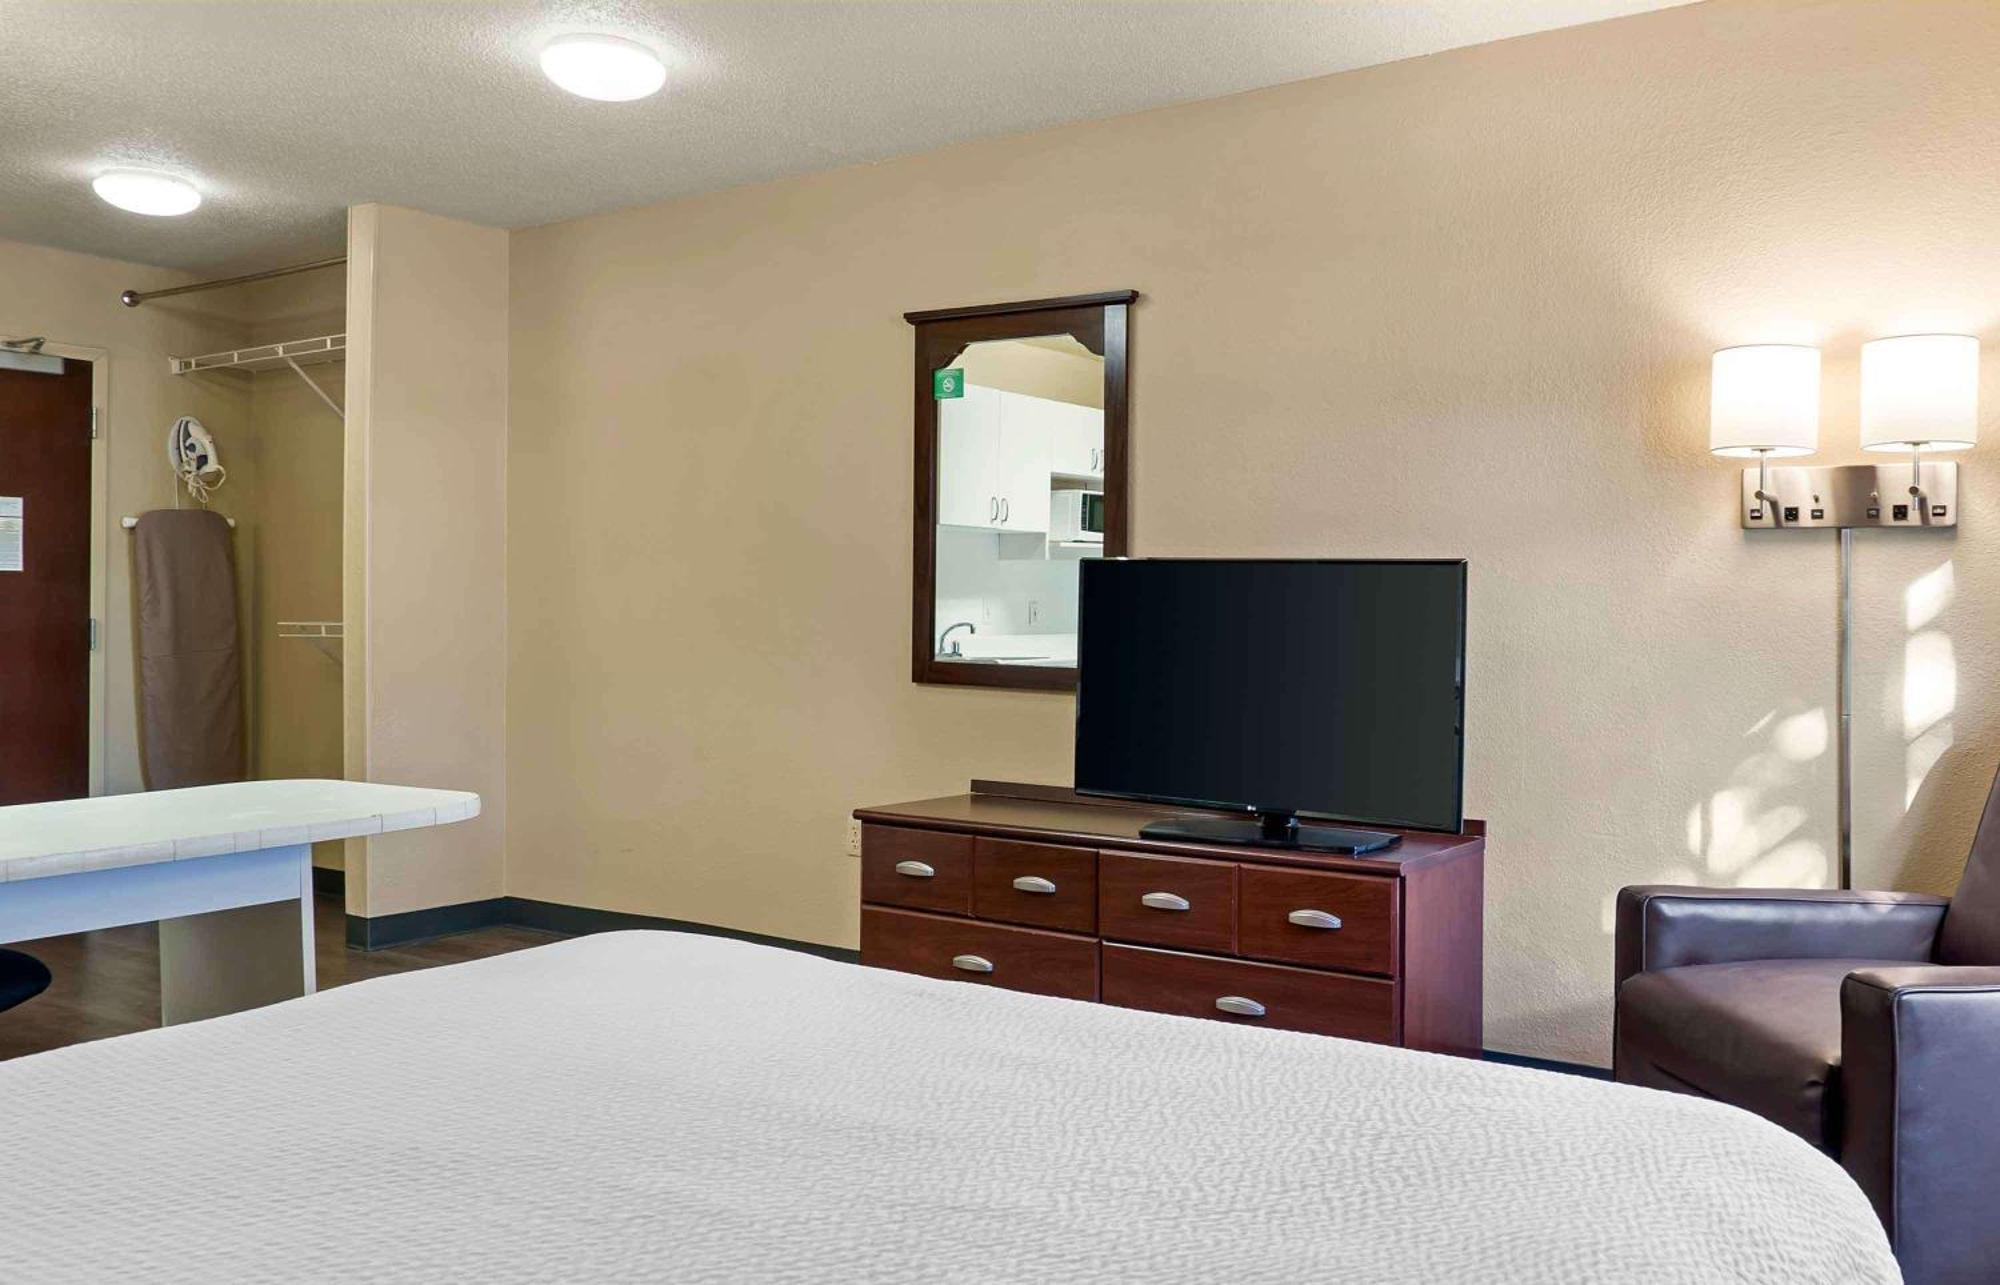 Extended Stay America Select Suites - Detroit - Novi - Haggerty Road Northville Exterior photo